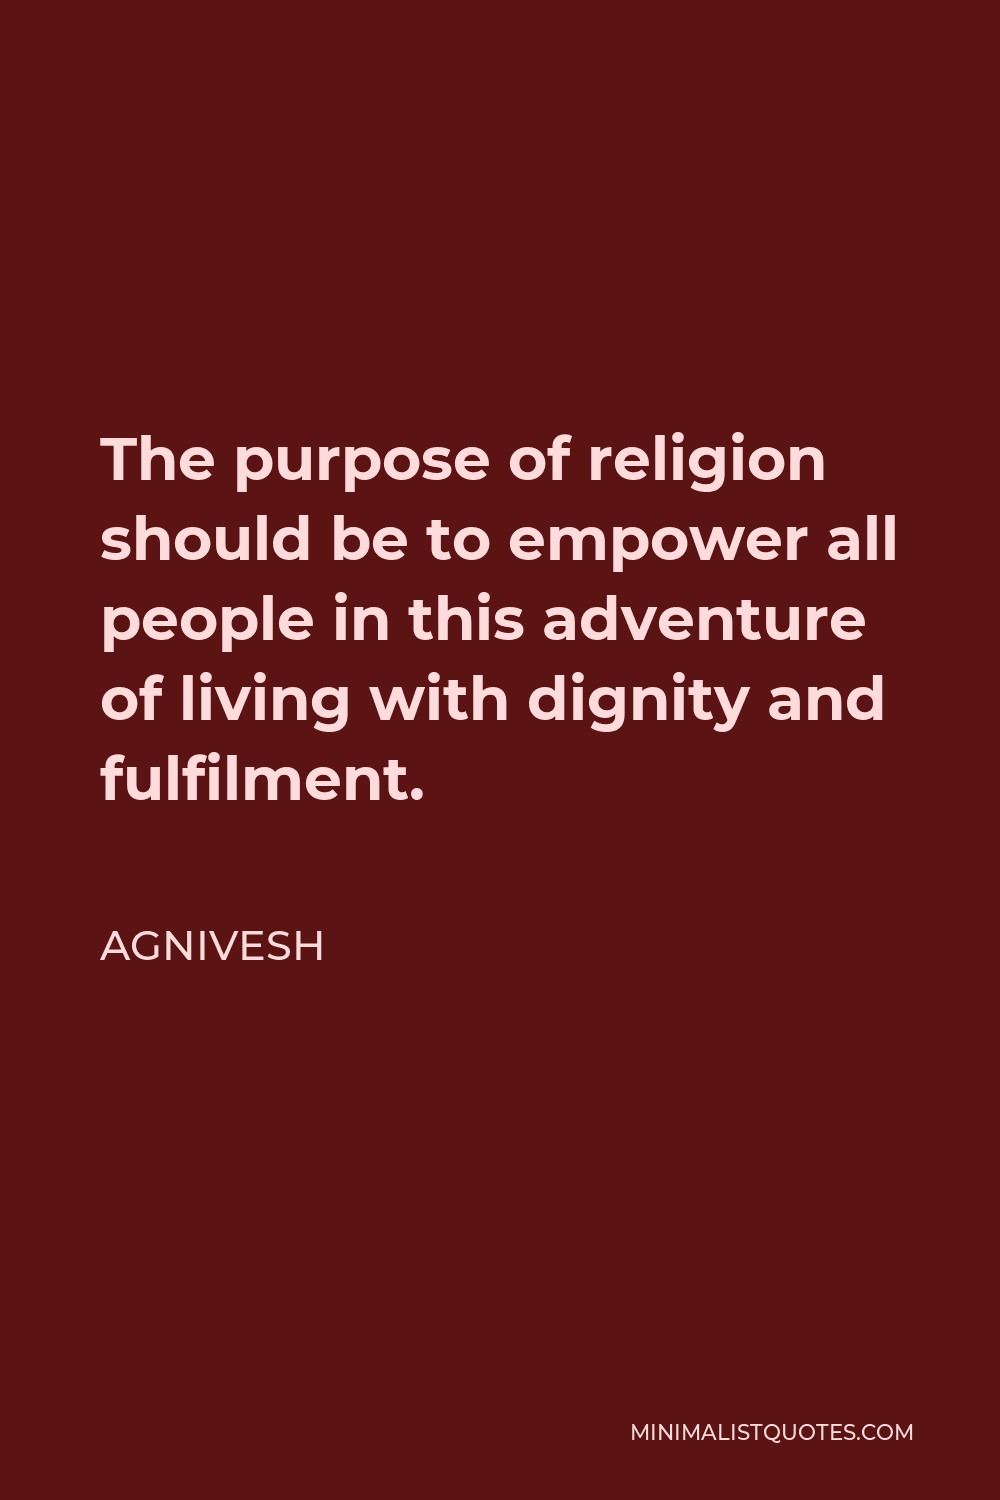 Agnivesh Quote - The purpose of religion should be to empower all people in this adventure of living with dignity and fulfilment.